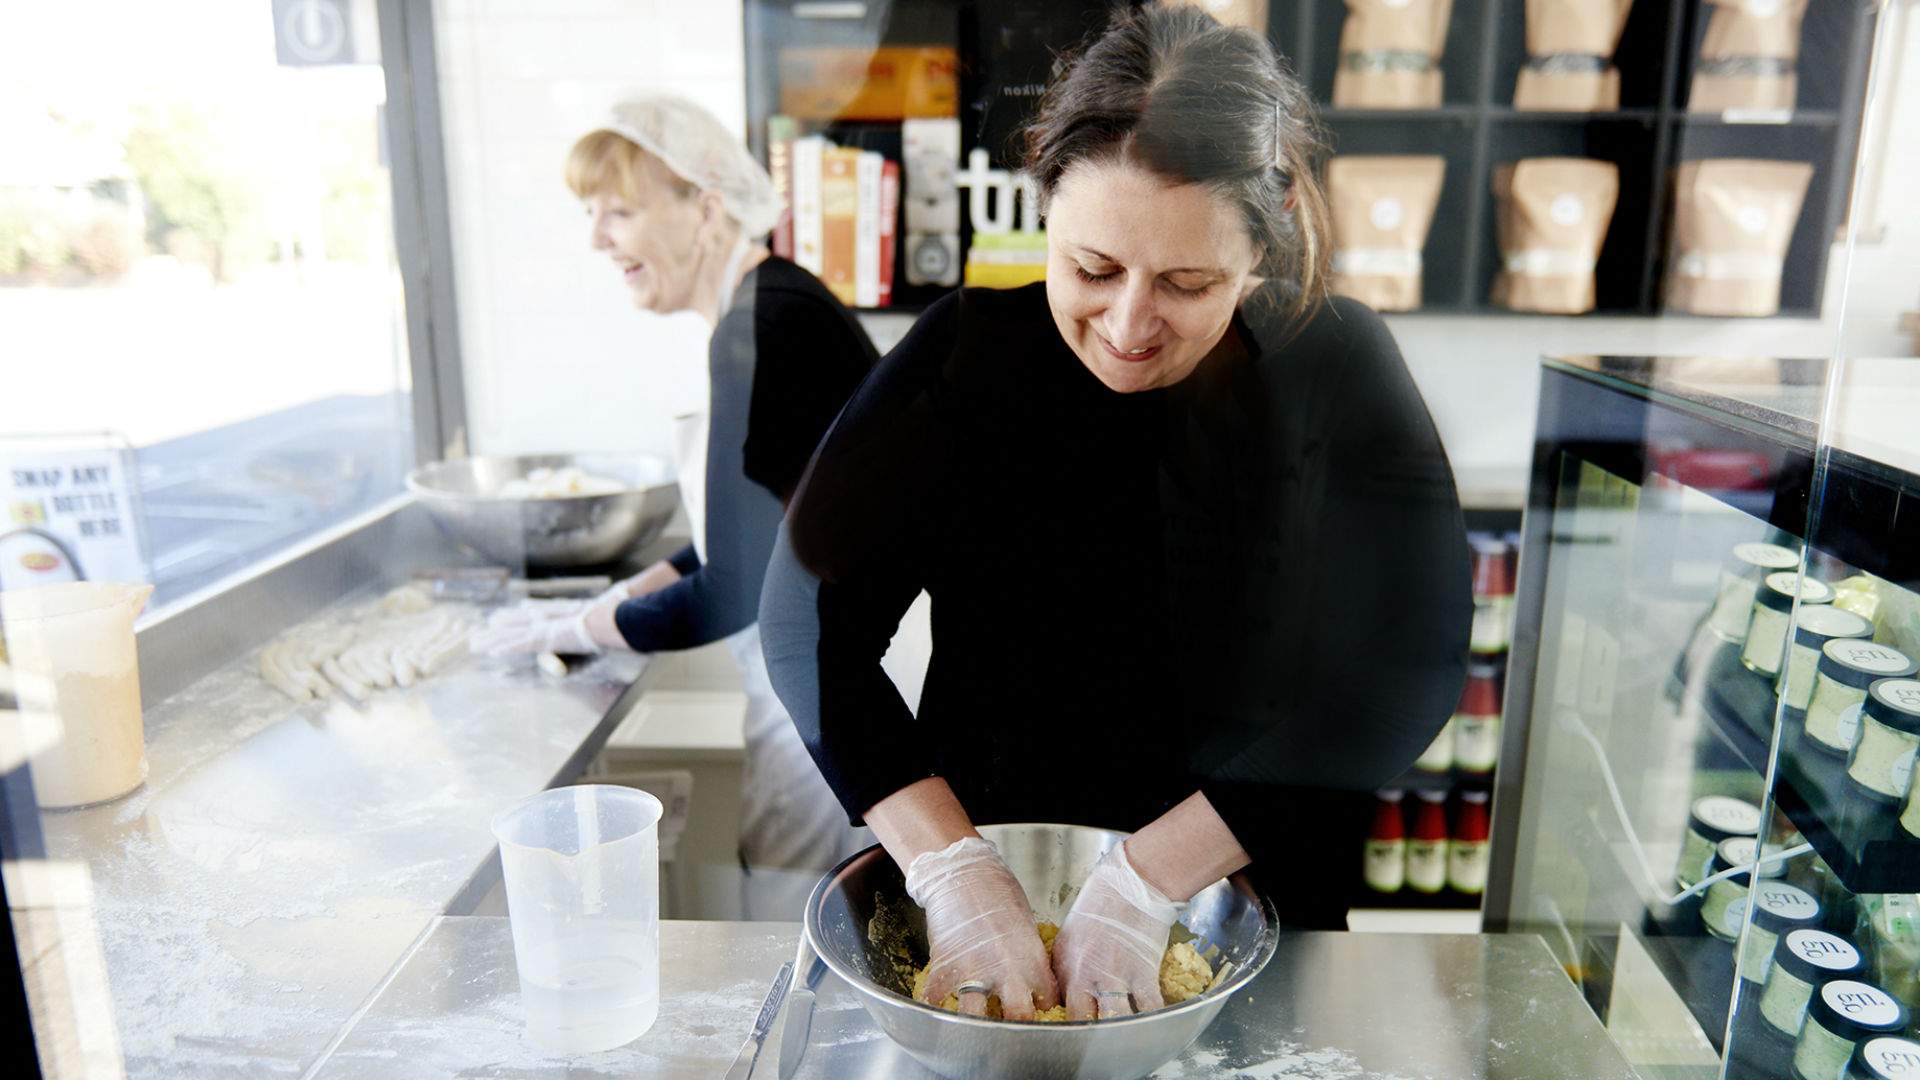 Gnoccheria Is Coburg's New Takeaway Pasta Shop with 20 Different Types of Gnocchi